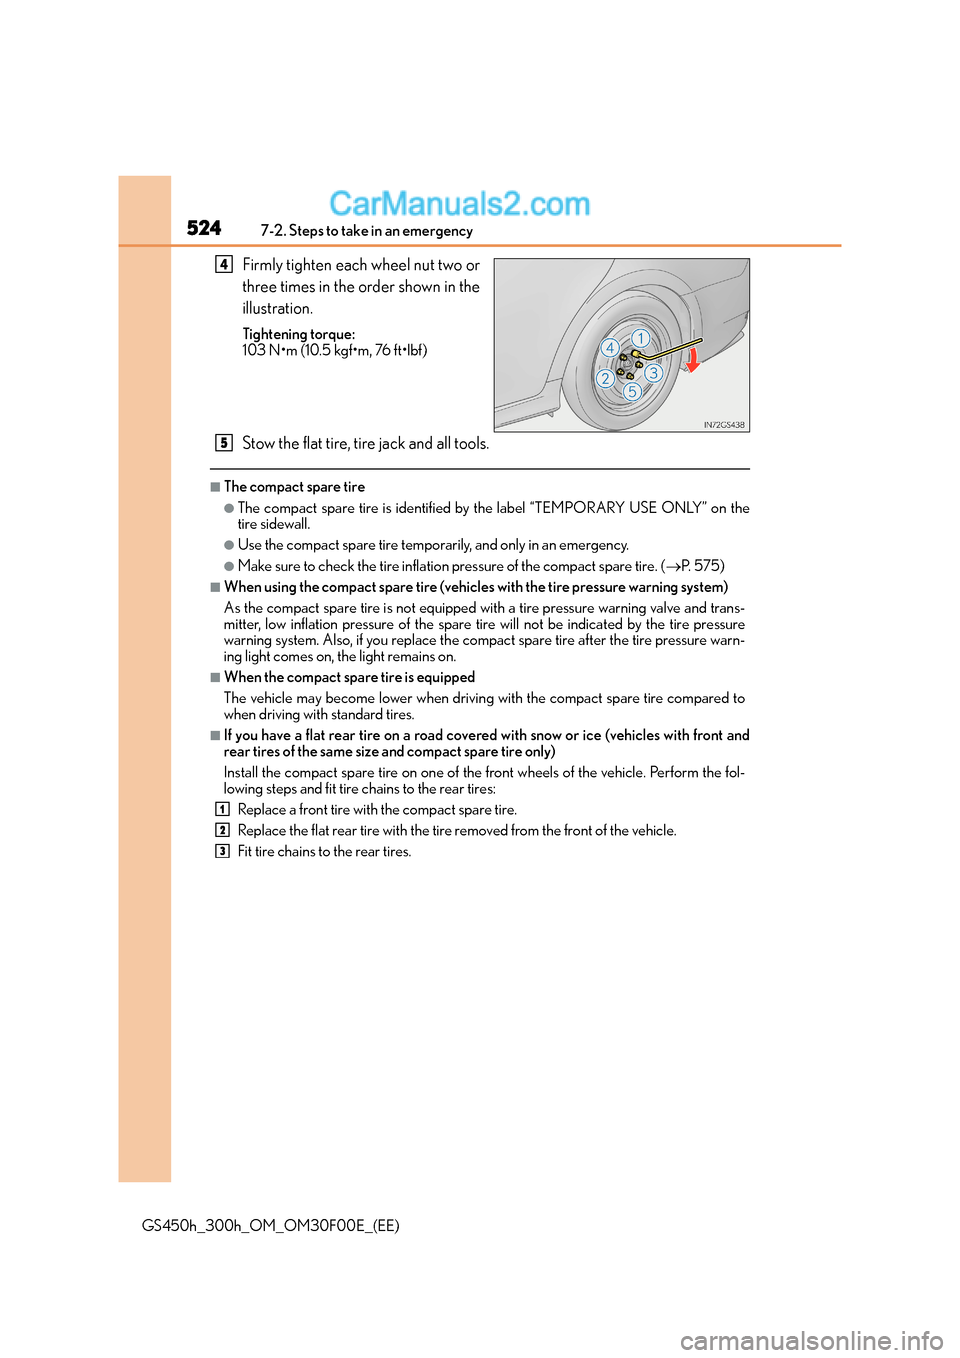 Lexus GS300h 2016  Owners Manual 5247-2. Steps to take in an emergency
GS450h_300h_OM_OM30F00E_(EE)
Firmly tighten each wheel nut two or
three times in the order shown in the
illustration.
Tightening torque:
103 N•m (10.5 kgf•m, 